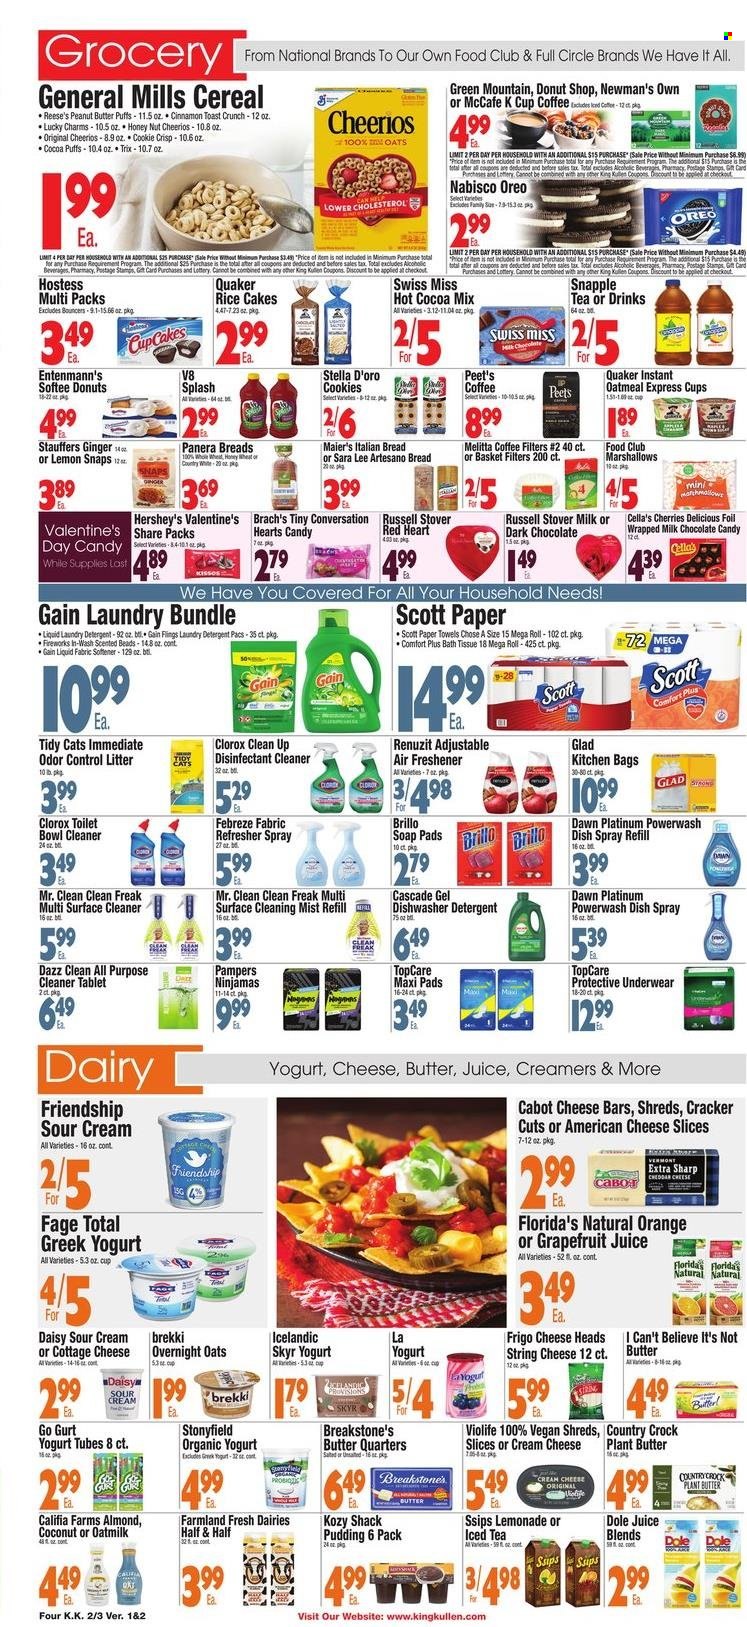 thumbnail - King Kullen Flyer - 02/03/2023 - 02/09/2023 - Sales products - bread, Sara Lee, cupcake, puffs, Entenmann's, Dole, cherries, oranges, coconut, Quaker, american cheese, cottage cheese, sliced cheese, string cheese, cheese, greek yoghurt, pudding, Oreo, yoghurt, organic yoghurt, Swiss Miss, oat milk, I Can't Believe It's Not Butter, sour cream, Reese's, Hershey's, cookies, marshmallows, milk chocolate, crackers, dark chocolate, chocolate candies, Florida's Natural, oatmeal, cereals, Cheerios, Trix, cinnamon, peanut butter, lemonade, juice, ice tea, Snapple, hot cocoa, coffee capsules, McCafe, K-Cups, Green Mountain, Red Heart, bath tissue, Scott, kitchen towels, paper towels, detergent, Gain, surface cleaner, cleaner, desinfection, all purpose cleaner, Clorox, fabric softener, laundry detergent, bag, Renuzit, Half and half. Page 4.